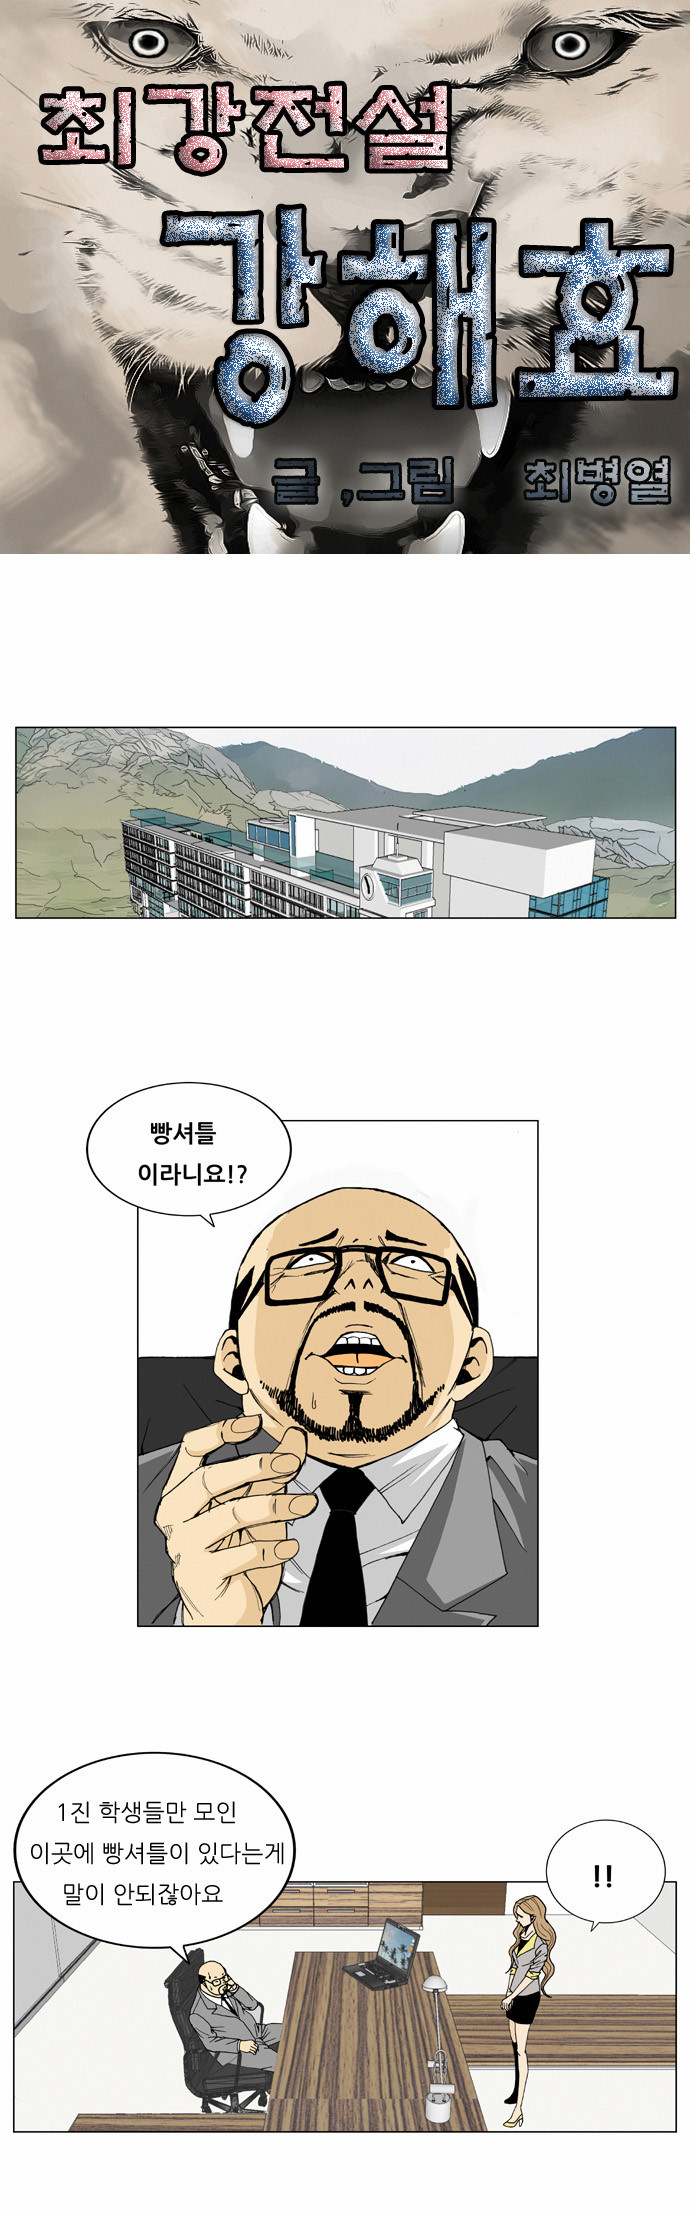 Ultimate Legend - Kang Hae Hyo - Chapter 40 - Page 3